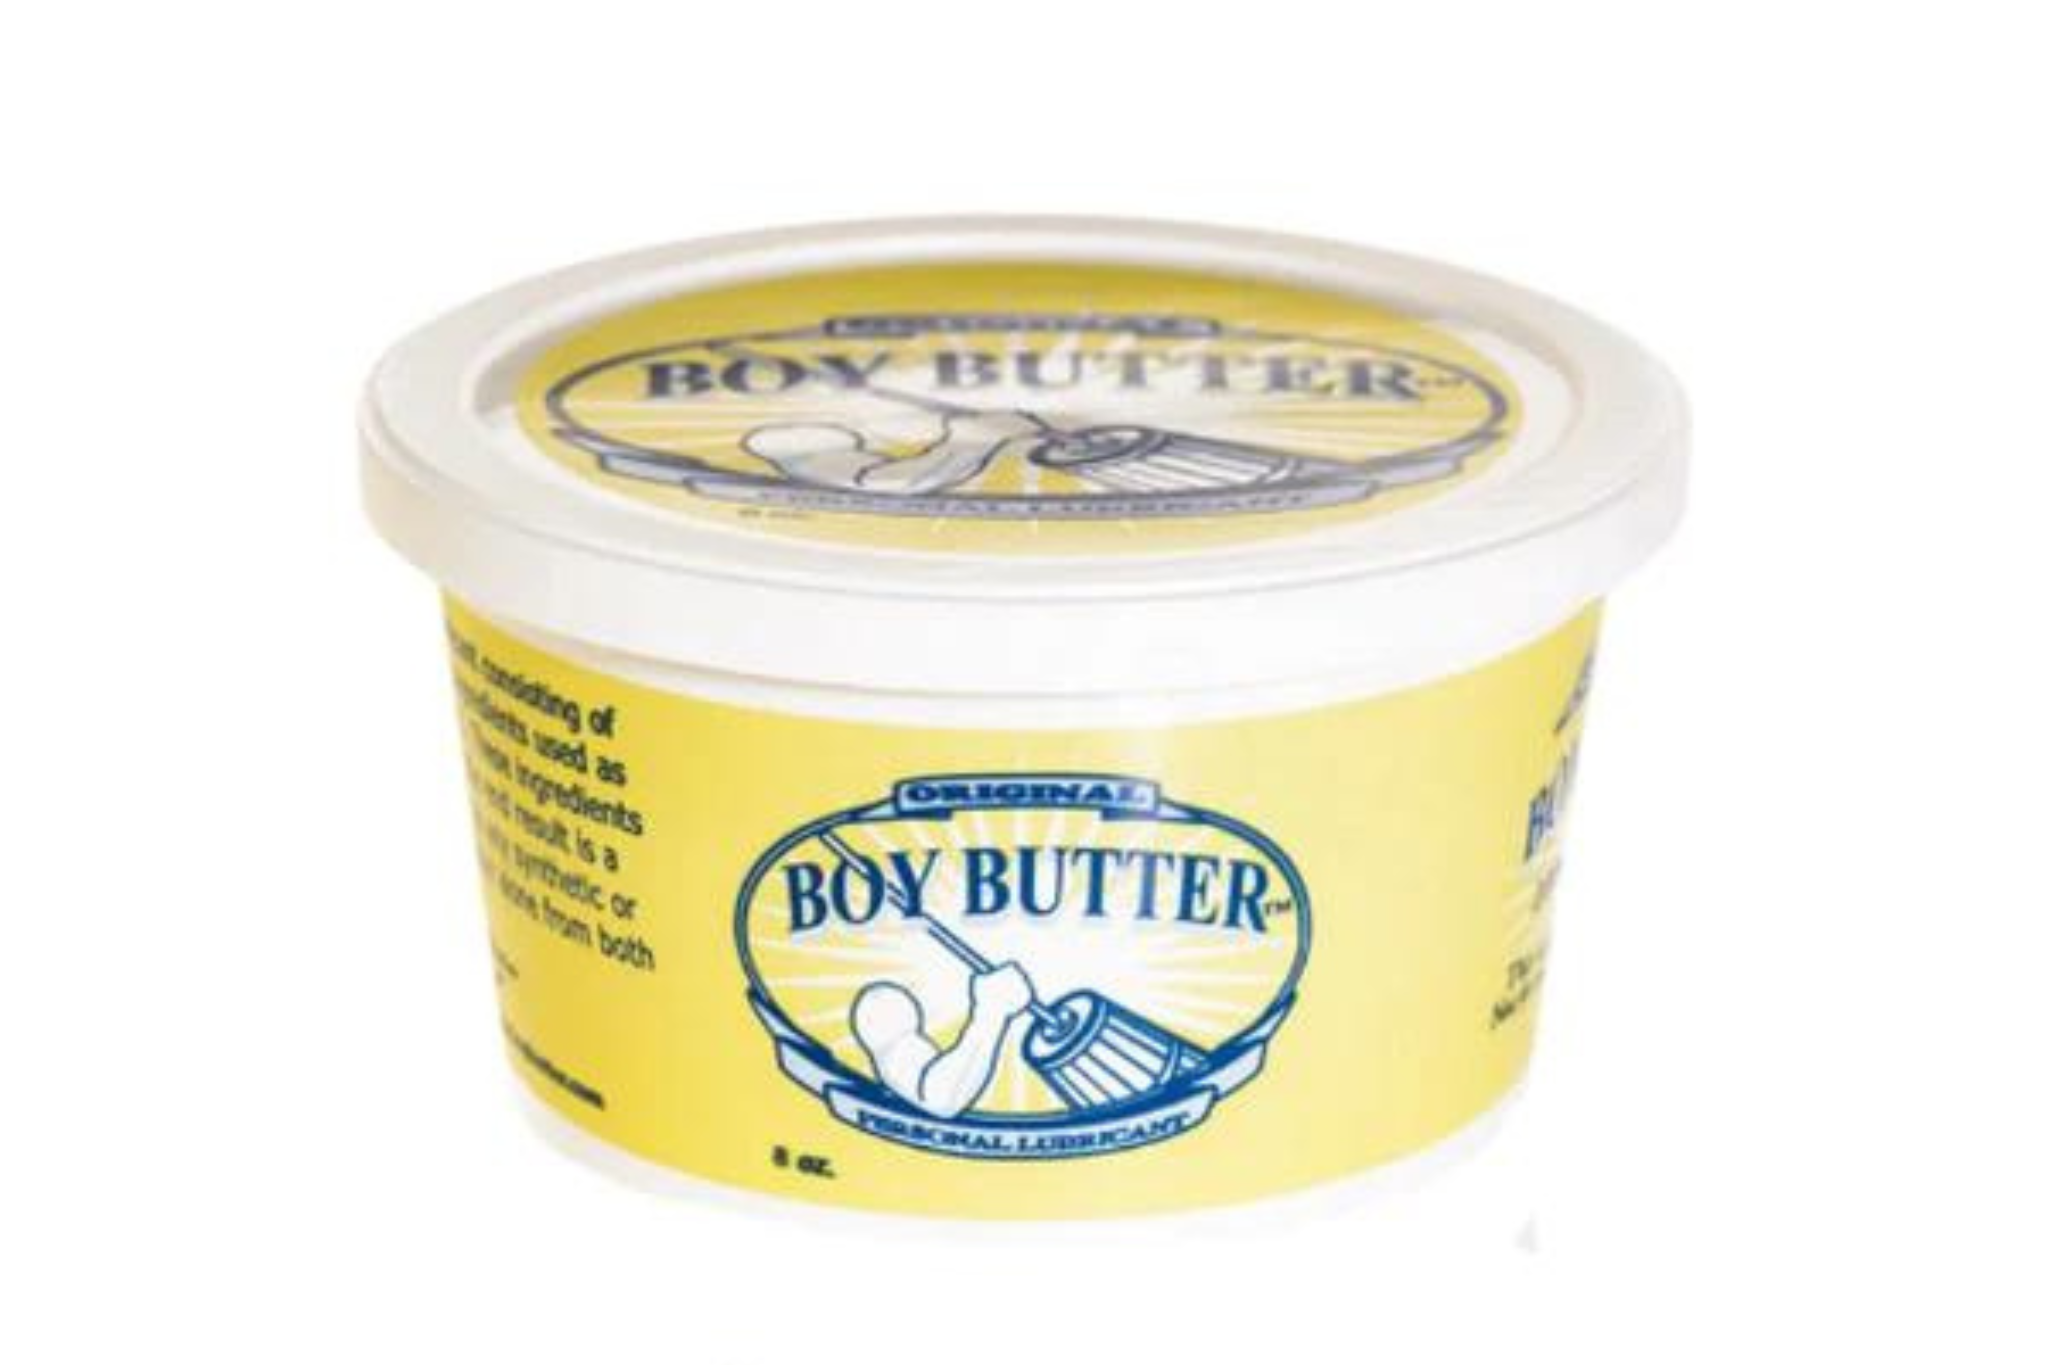 The History of the Boy Butter